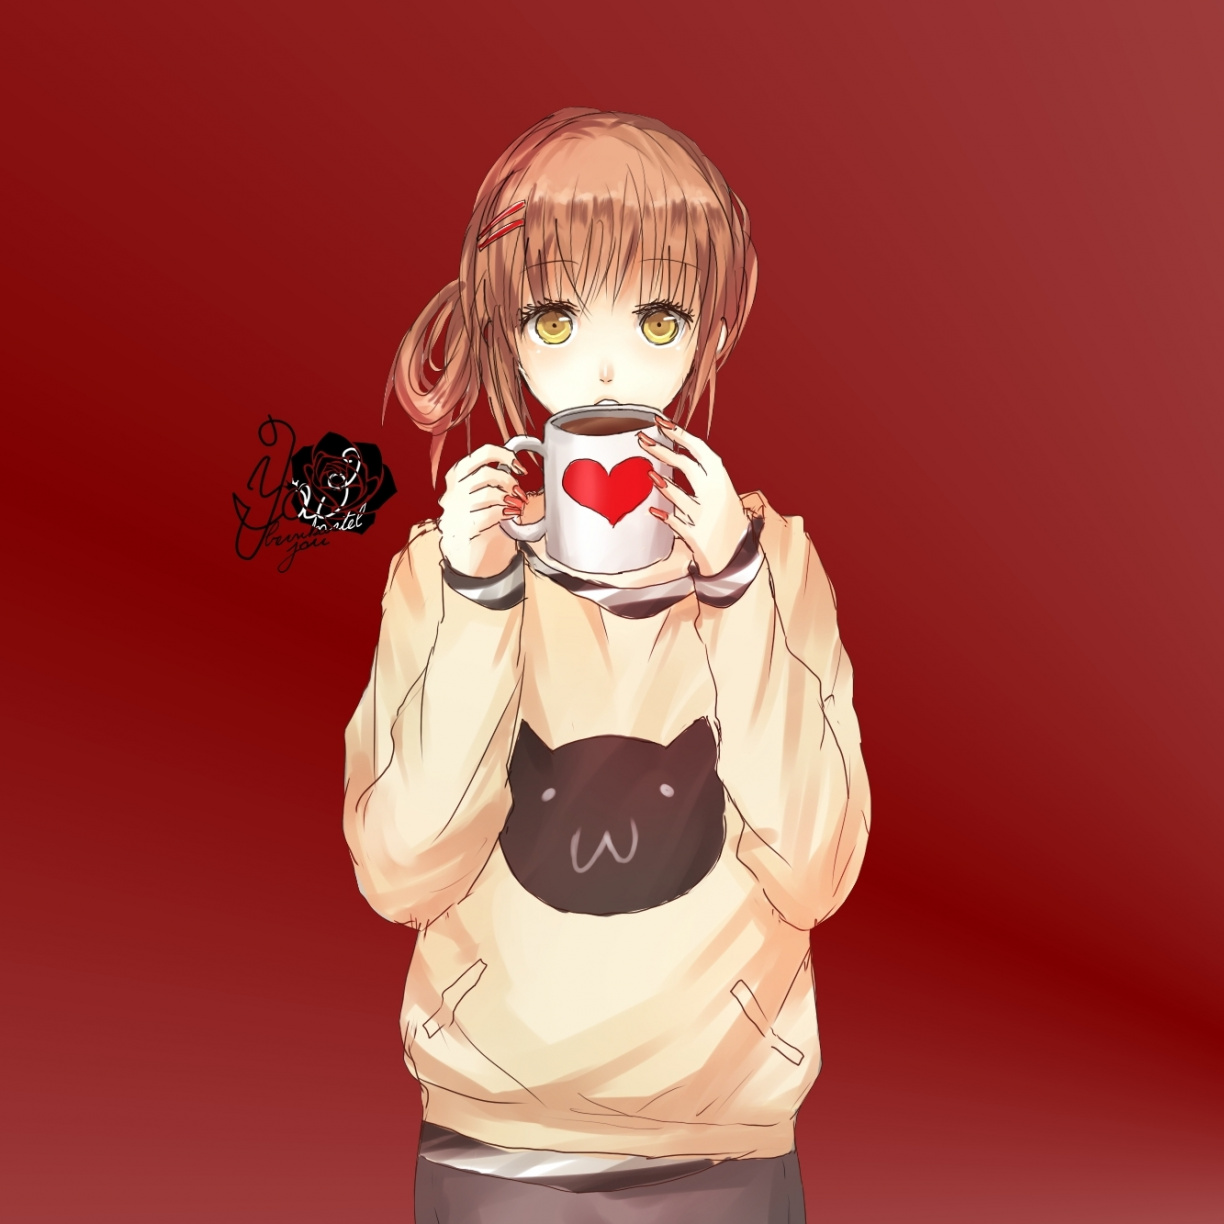 Curious, anime girl, coffee cup wallpaper, 2041x HD image, picture, 2c8556b8